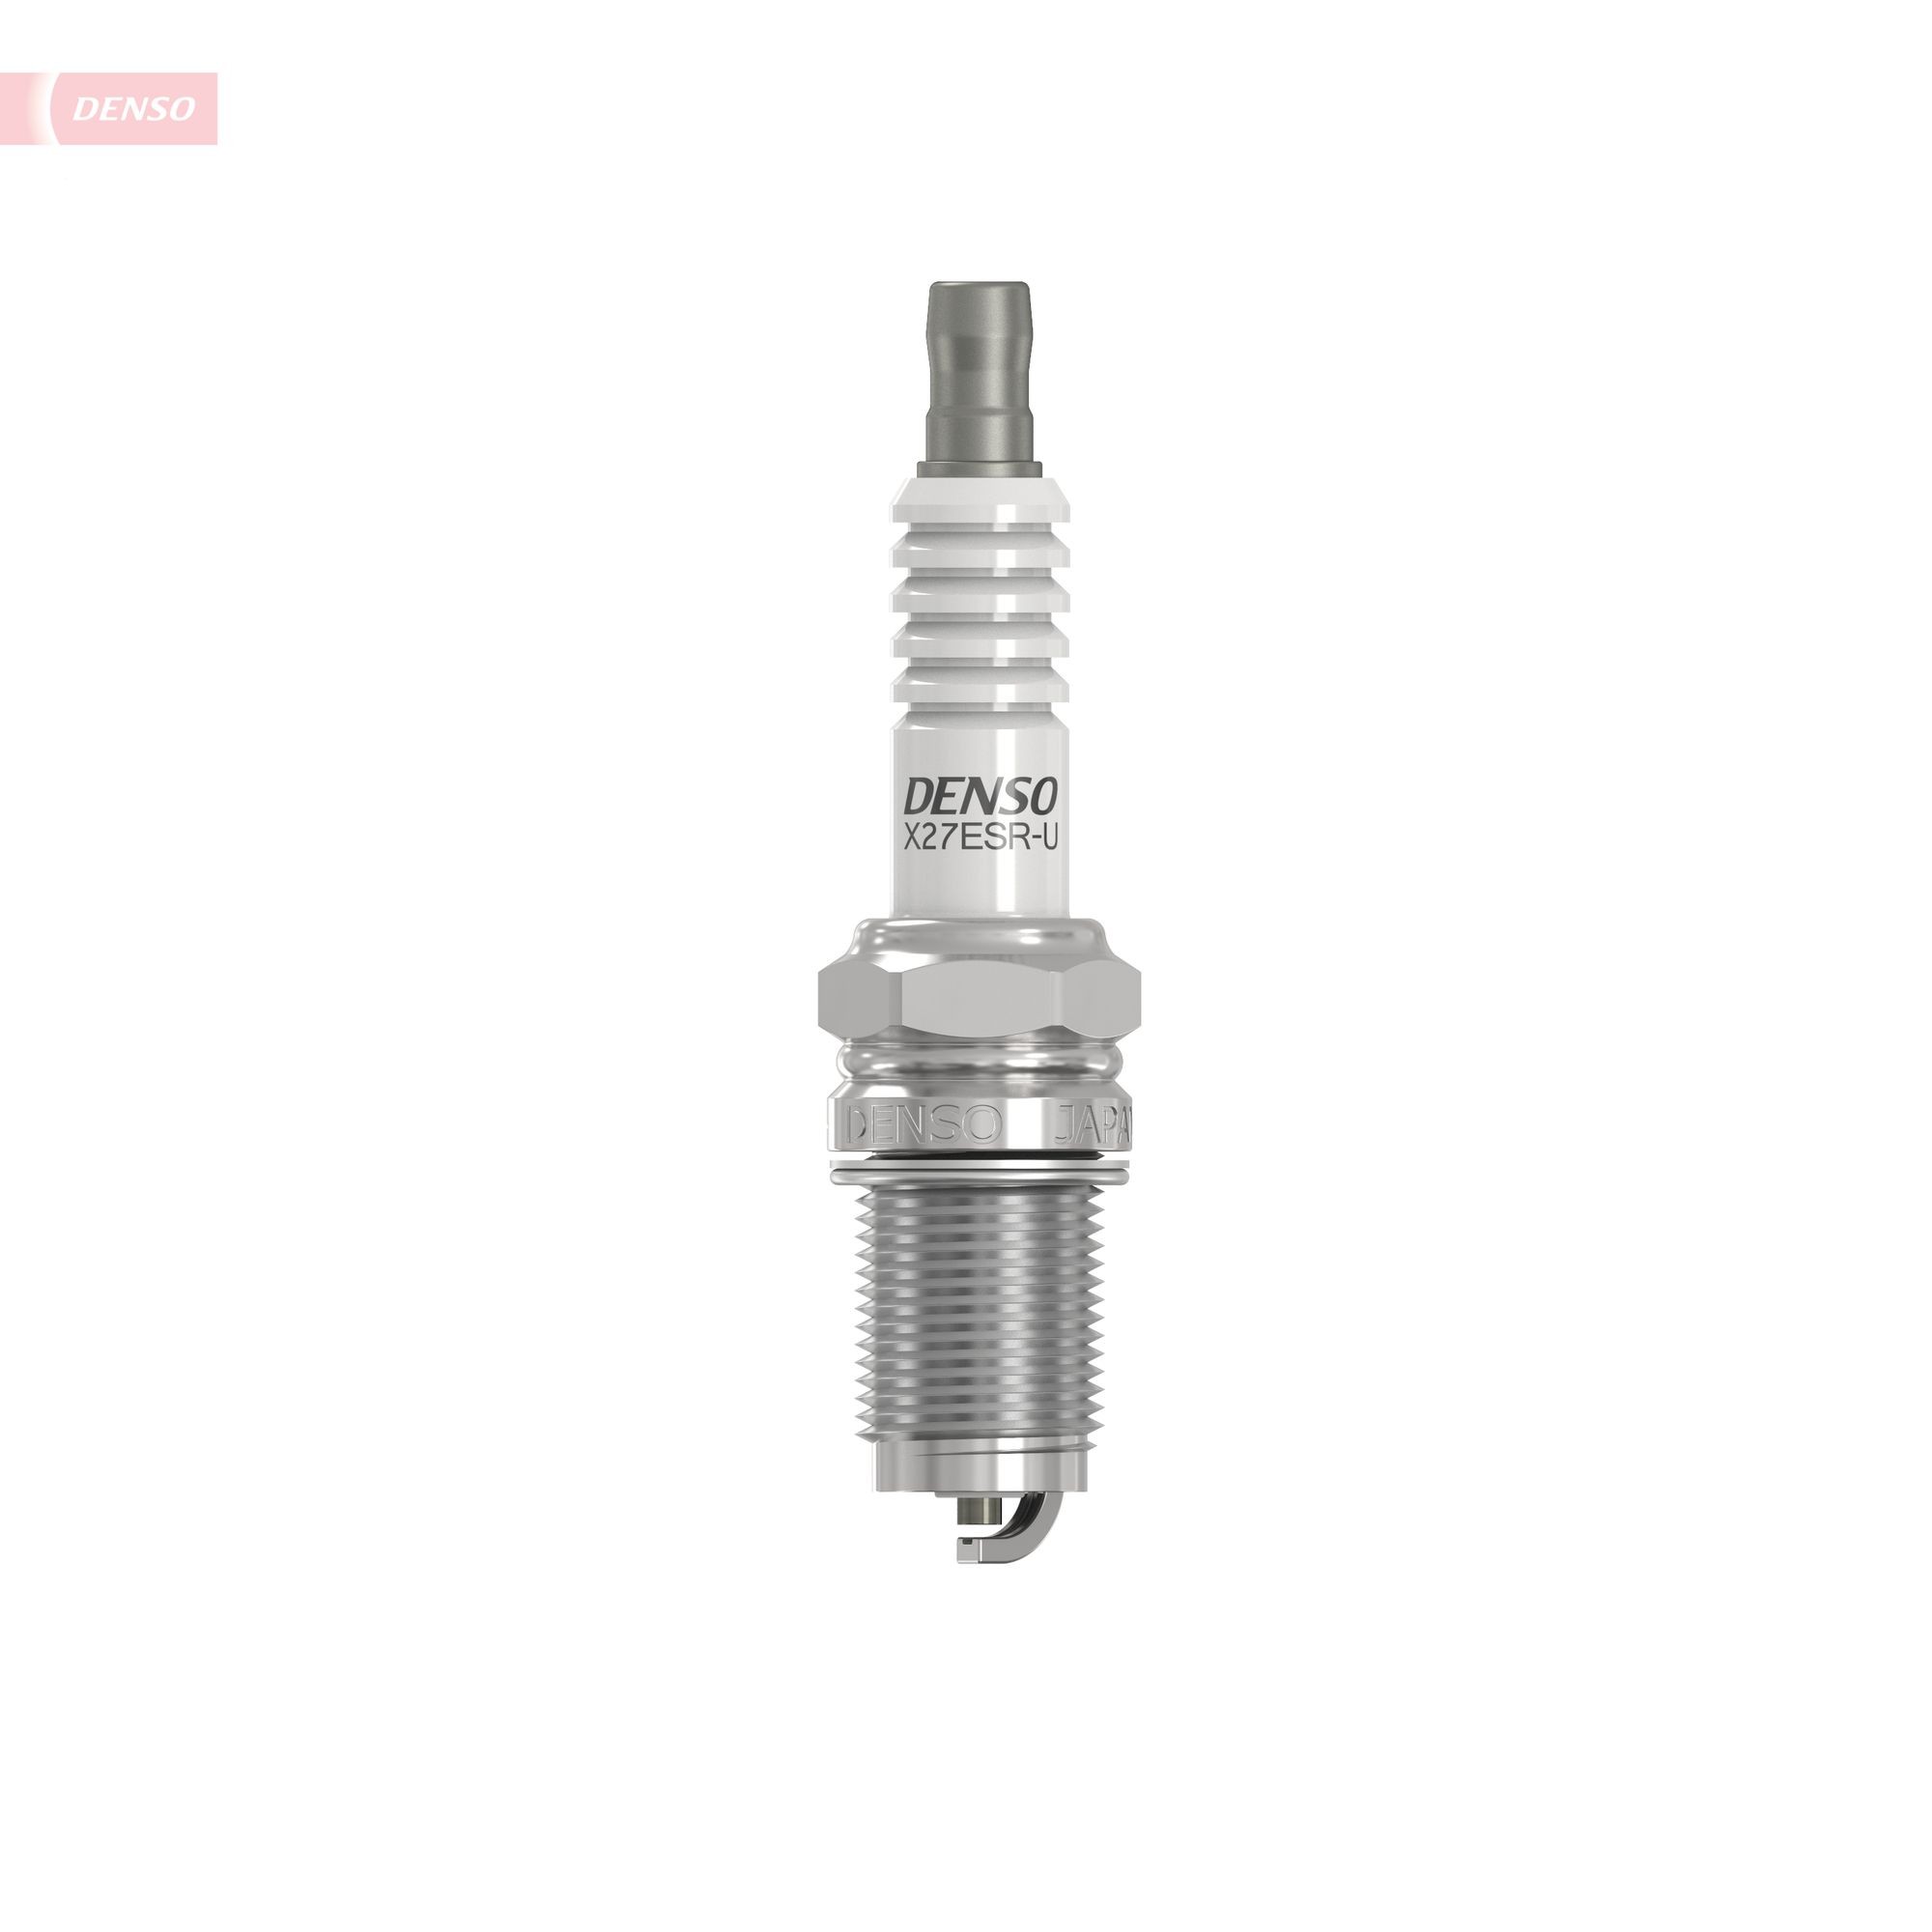 DENSO Spark plugs 4116 buy online